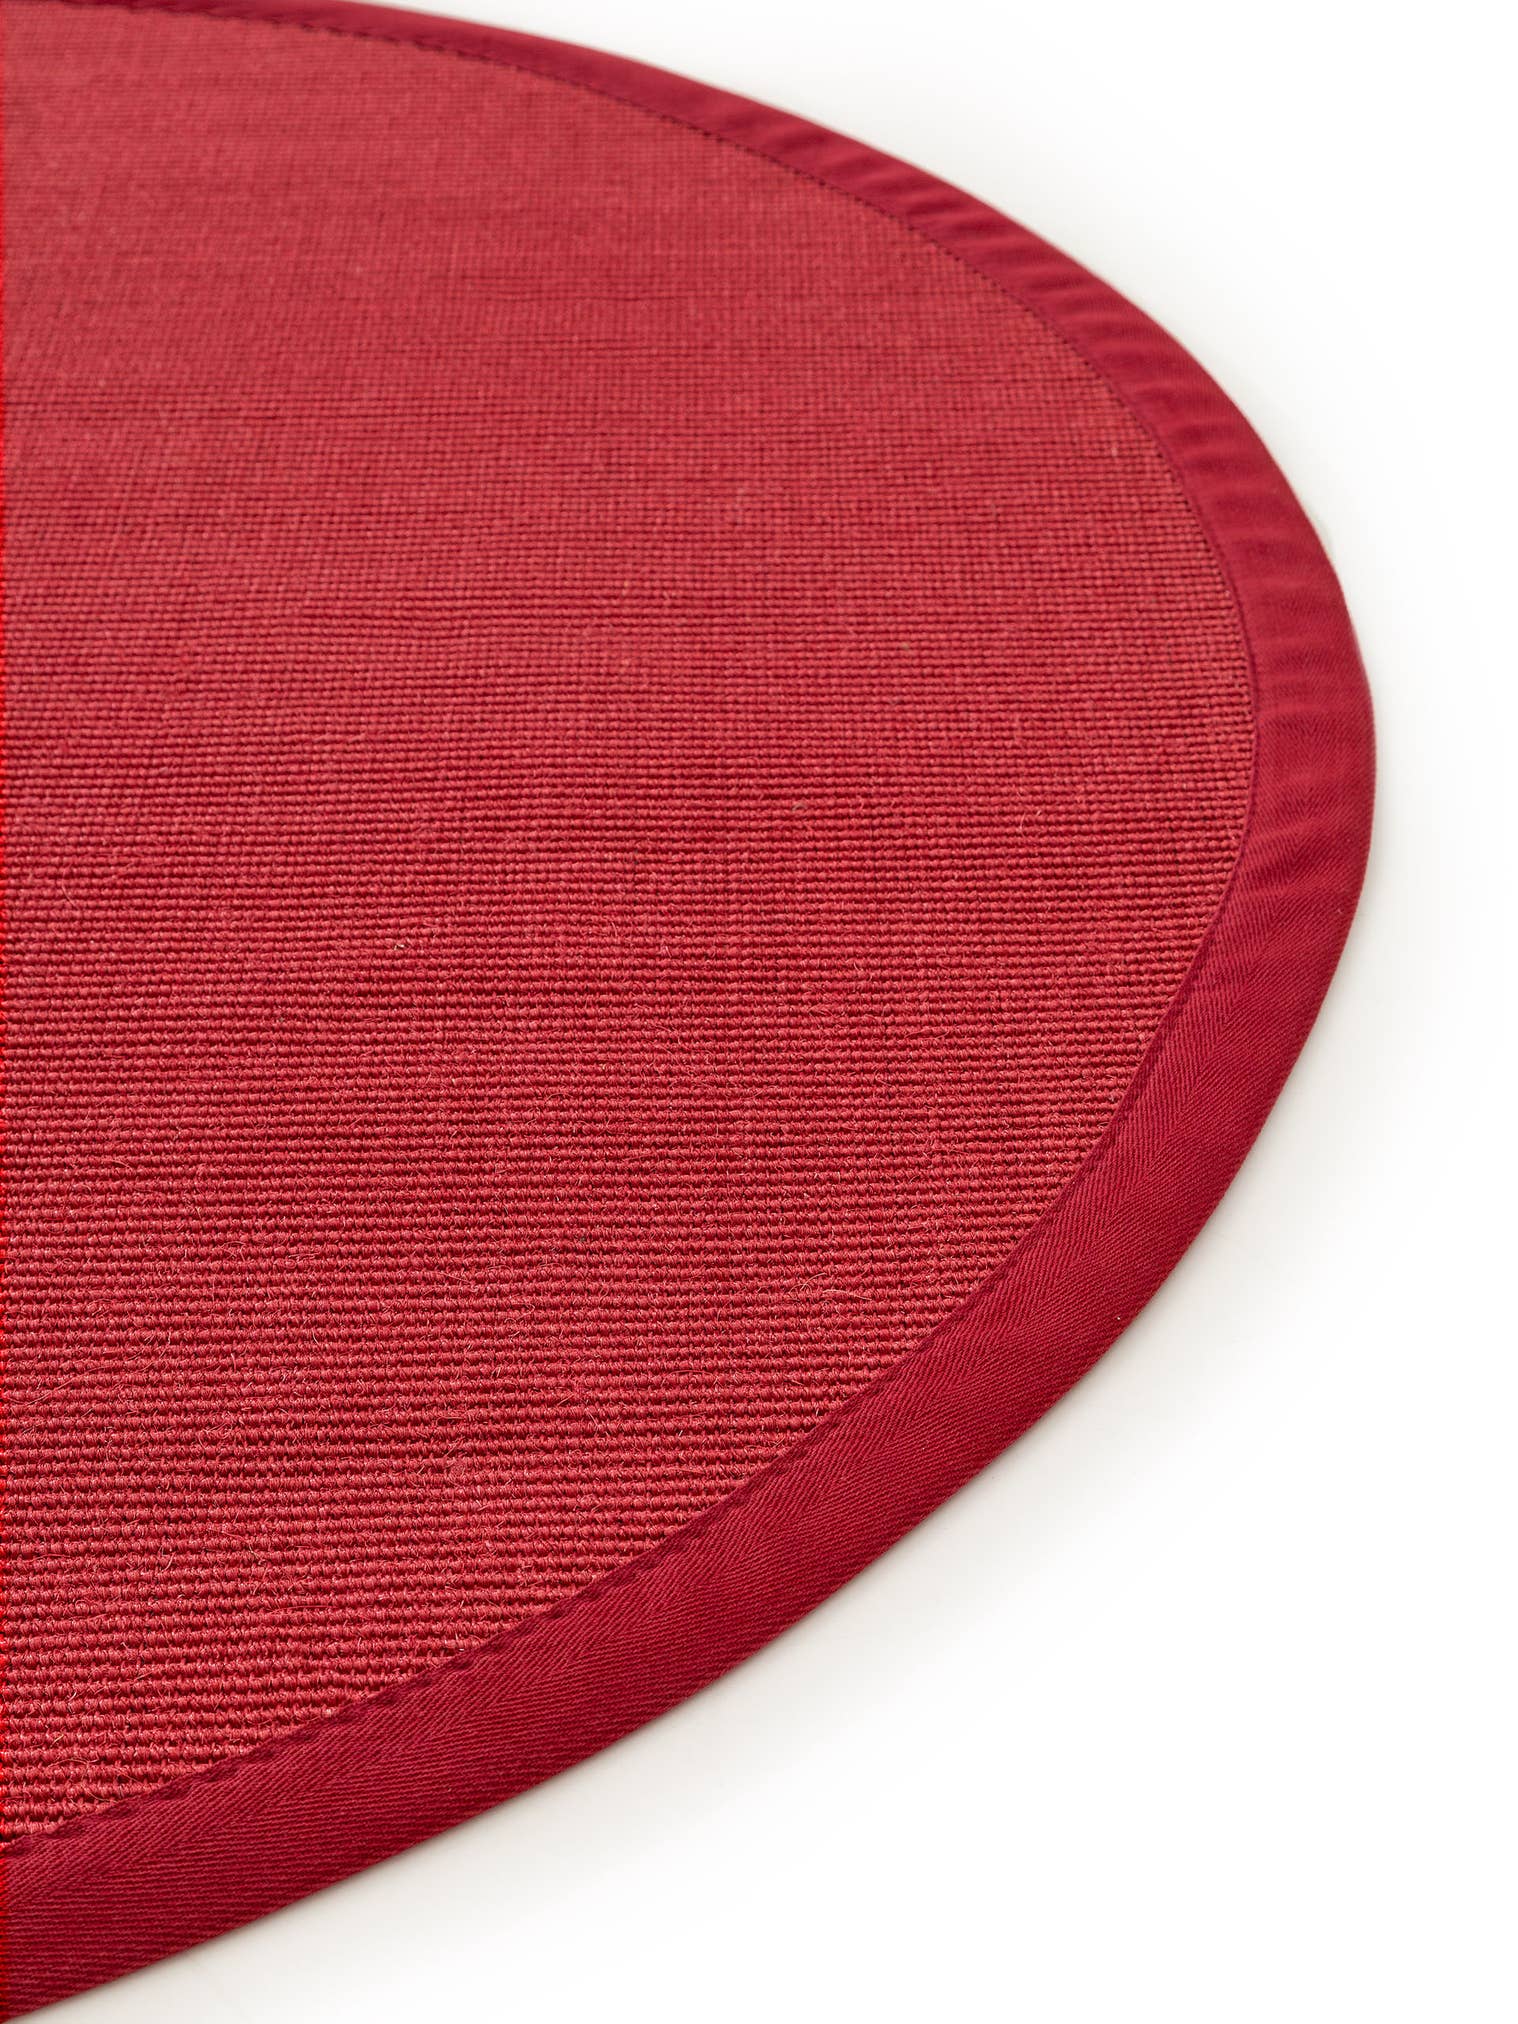 Rug made of 100% Sisal in Red with a 1- 5 mm high pile by benuta Nest